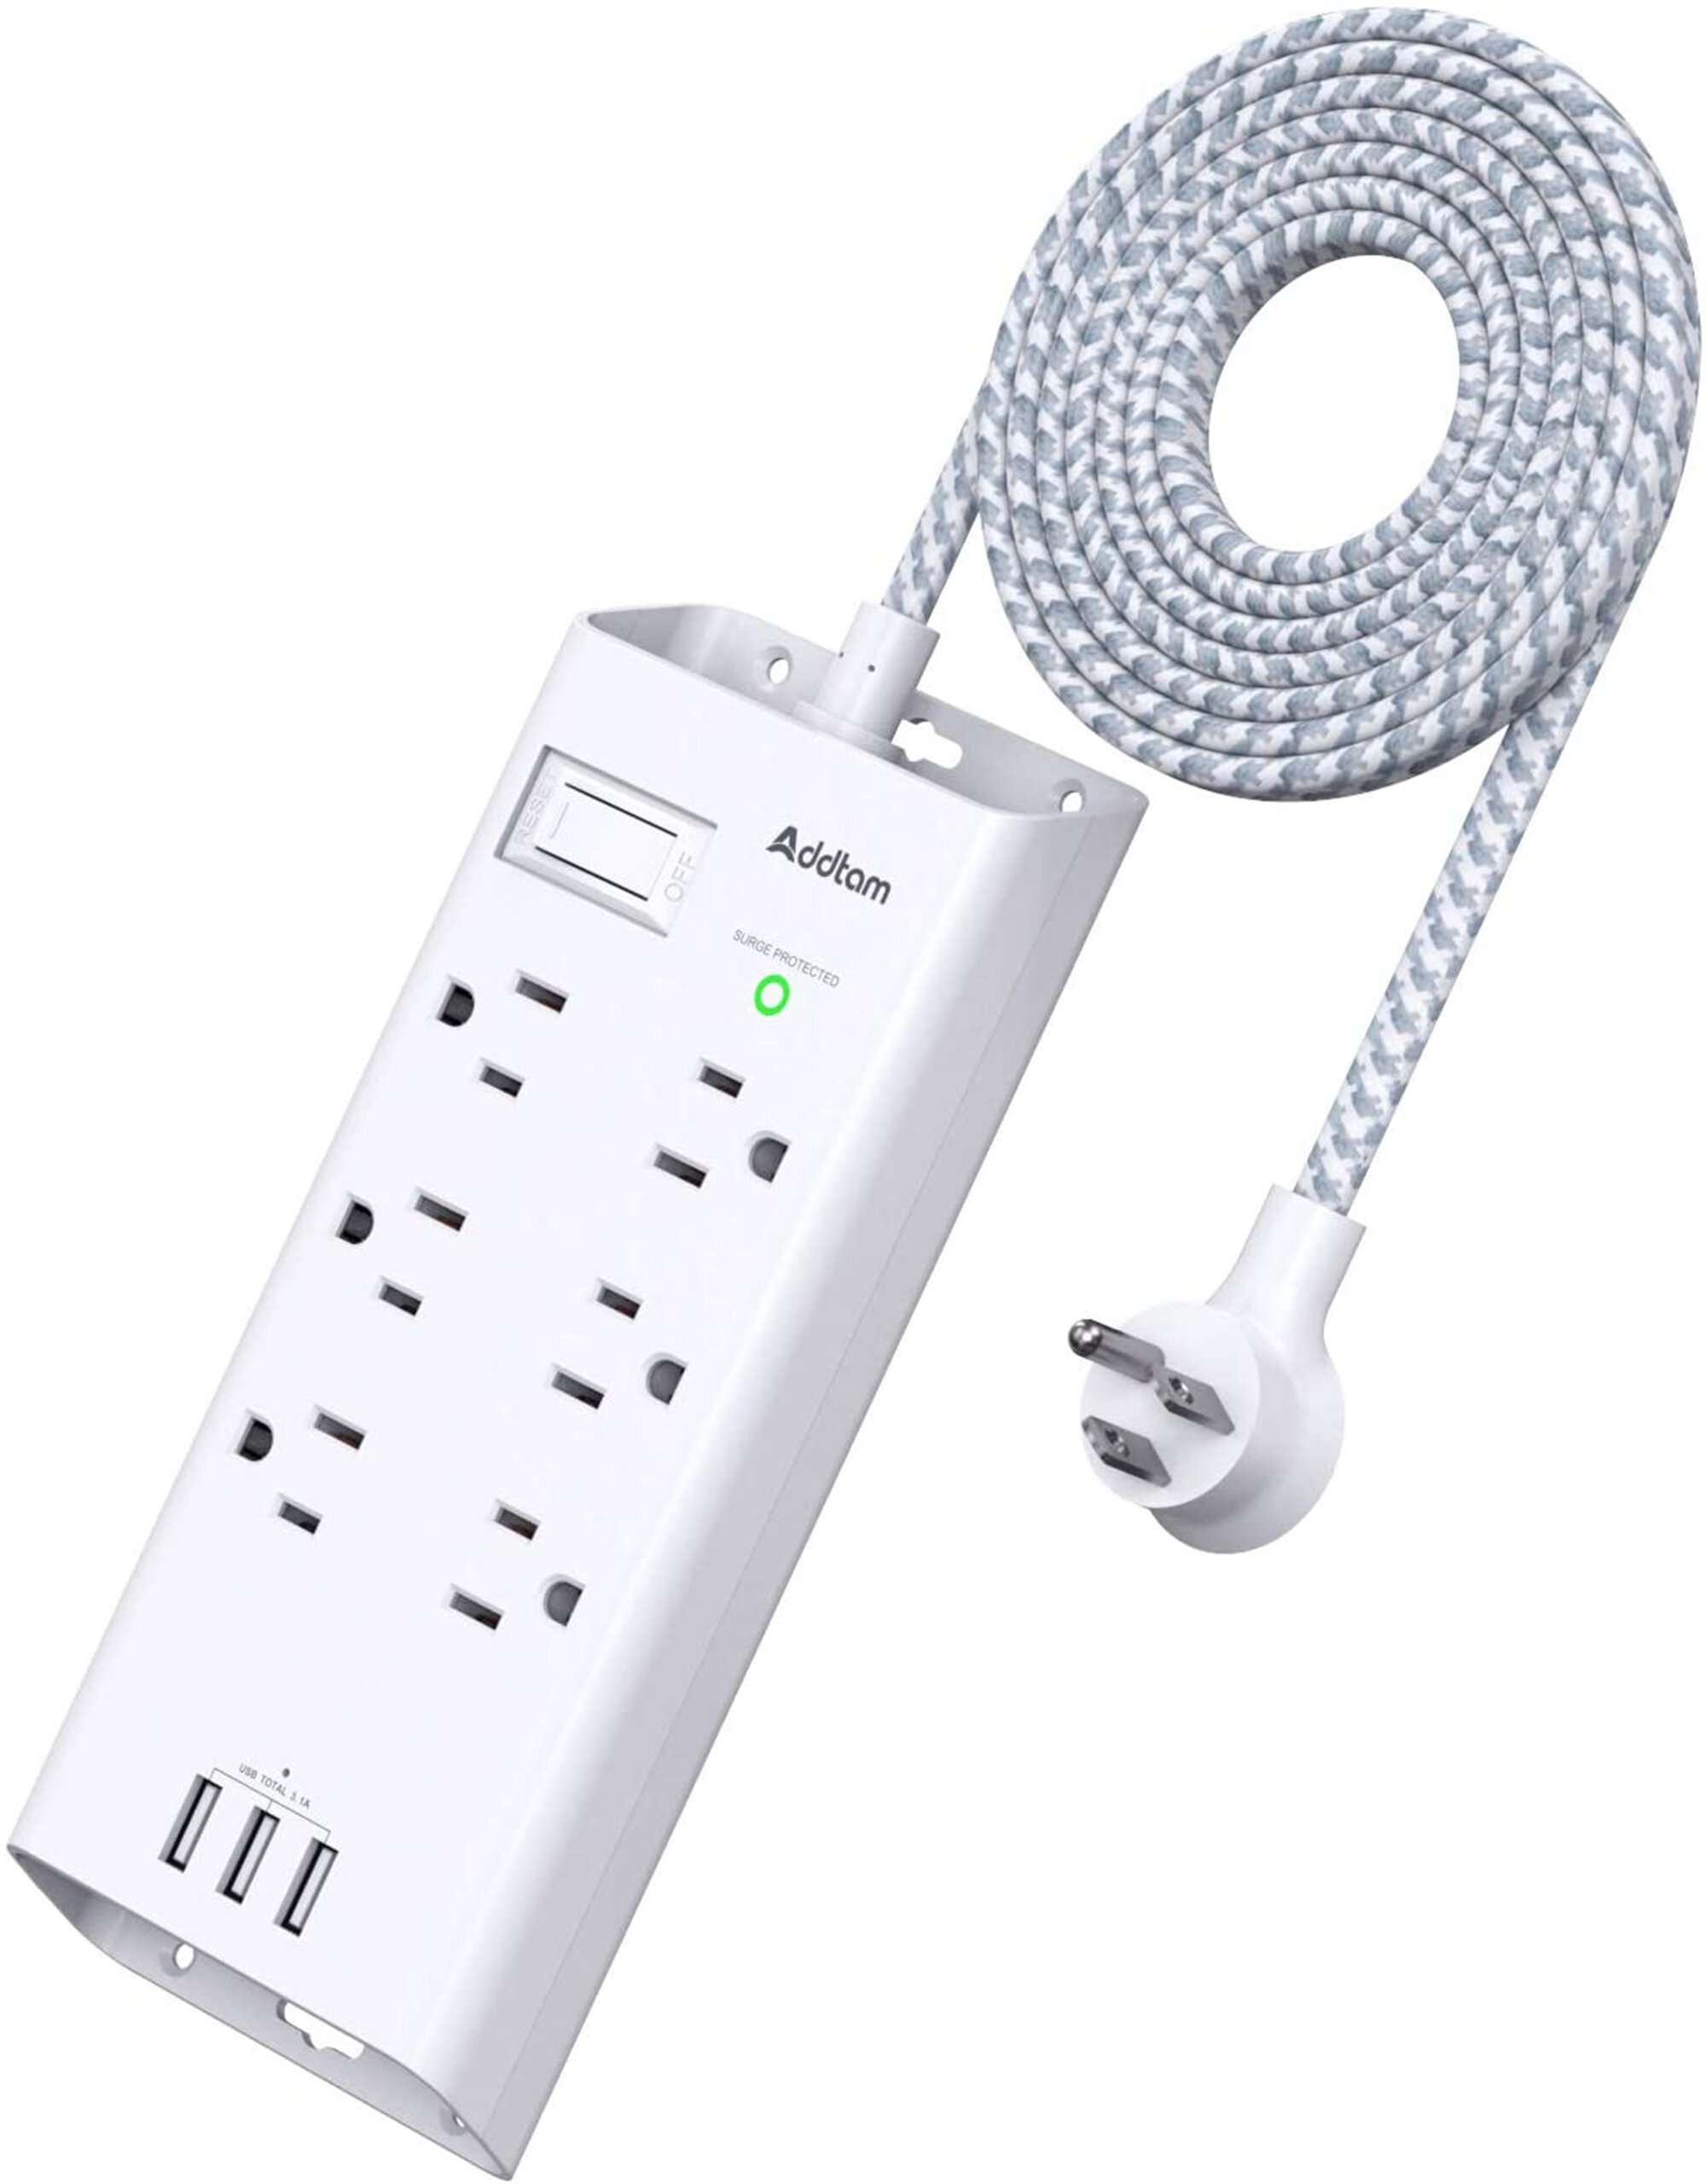 Smart Power Strip,6 Outlets and 6 USB Ports,with Surge Protector,6ft Long Cord